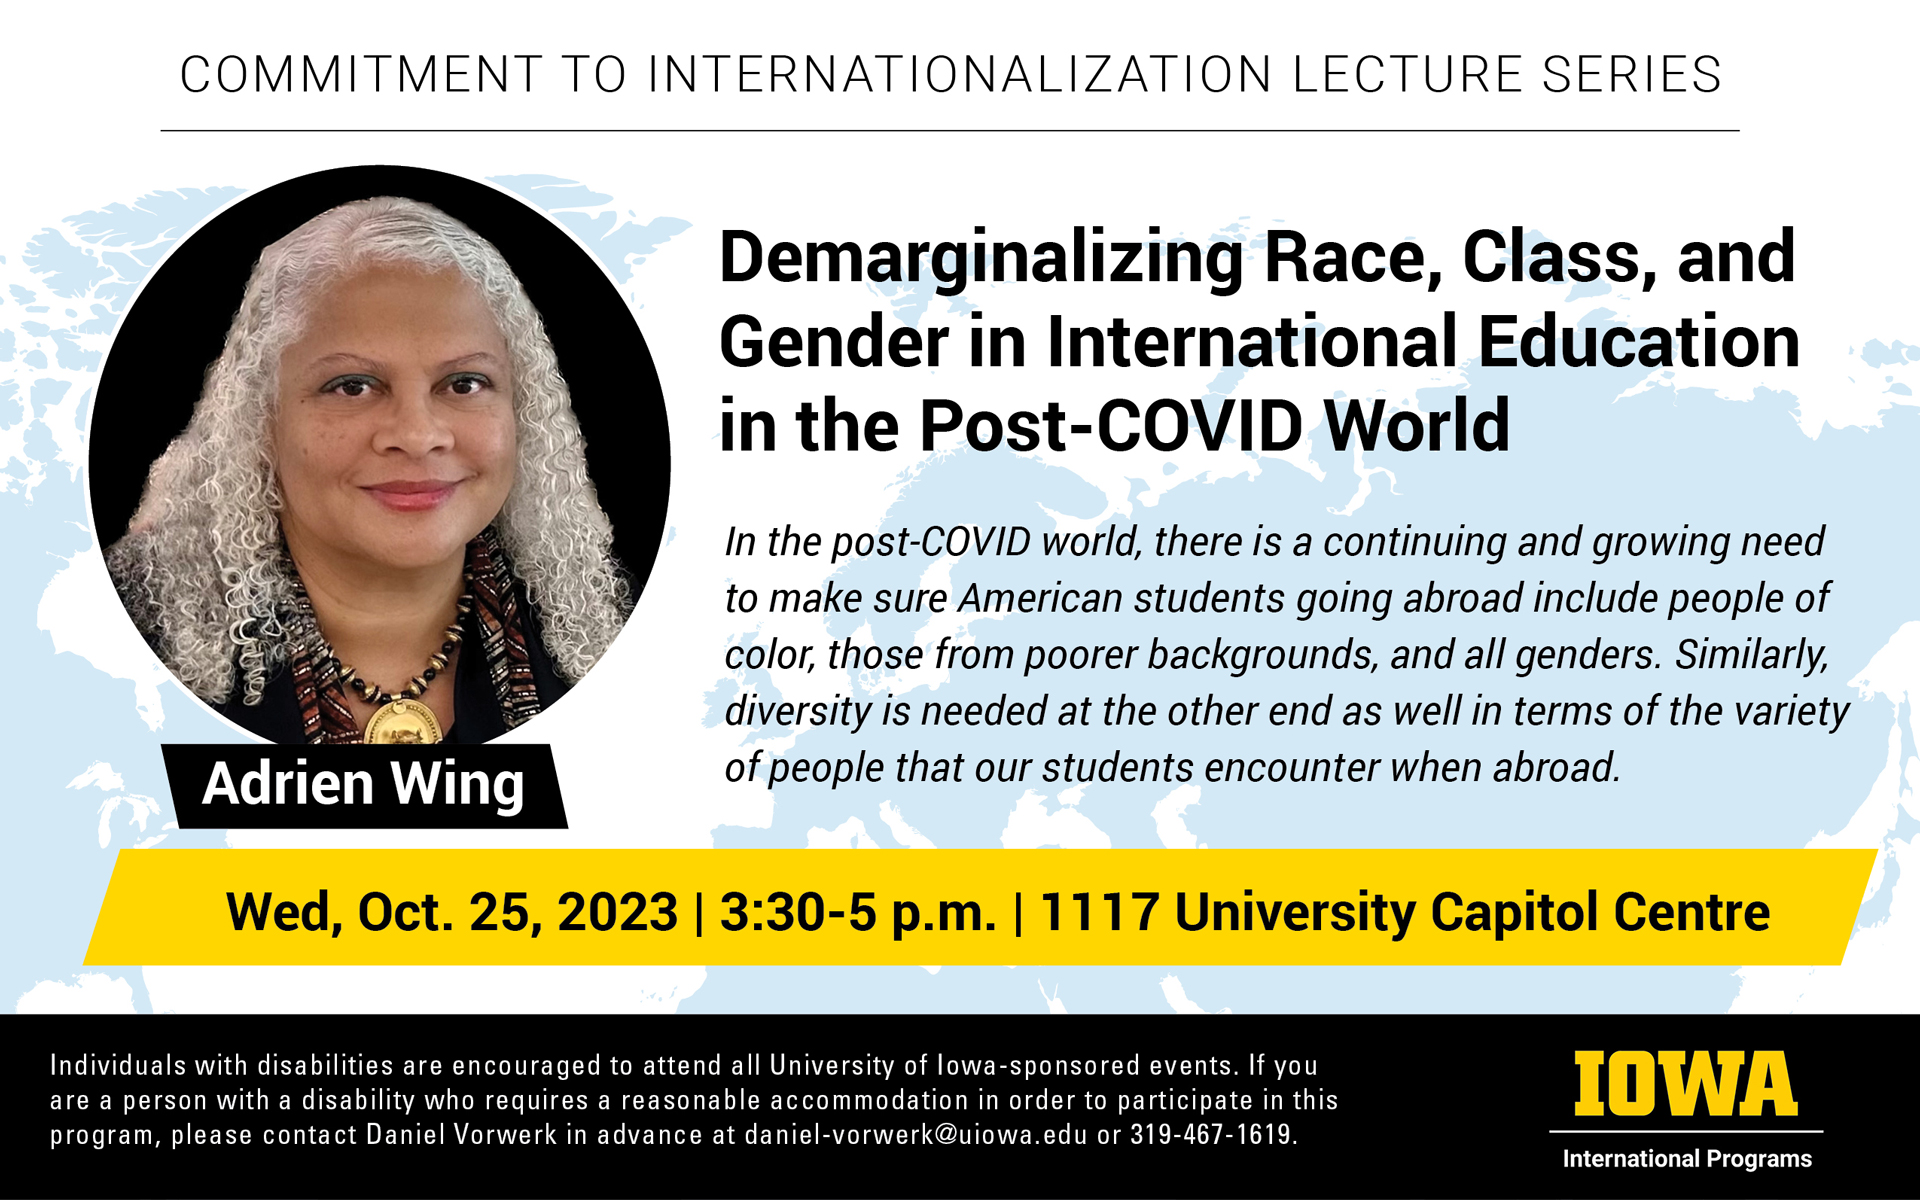 Demarginalizing Race, Class, and Gender in International Education in the Post-COVID World, lecture by Adrien Wing, October 25, 3:30-5pm at 1117 University Capitol Centre